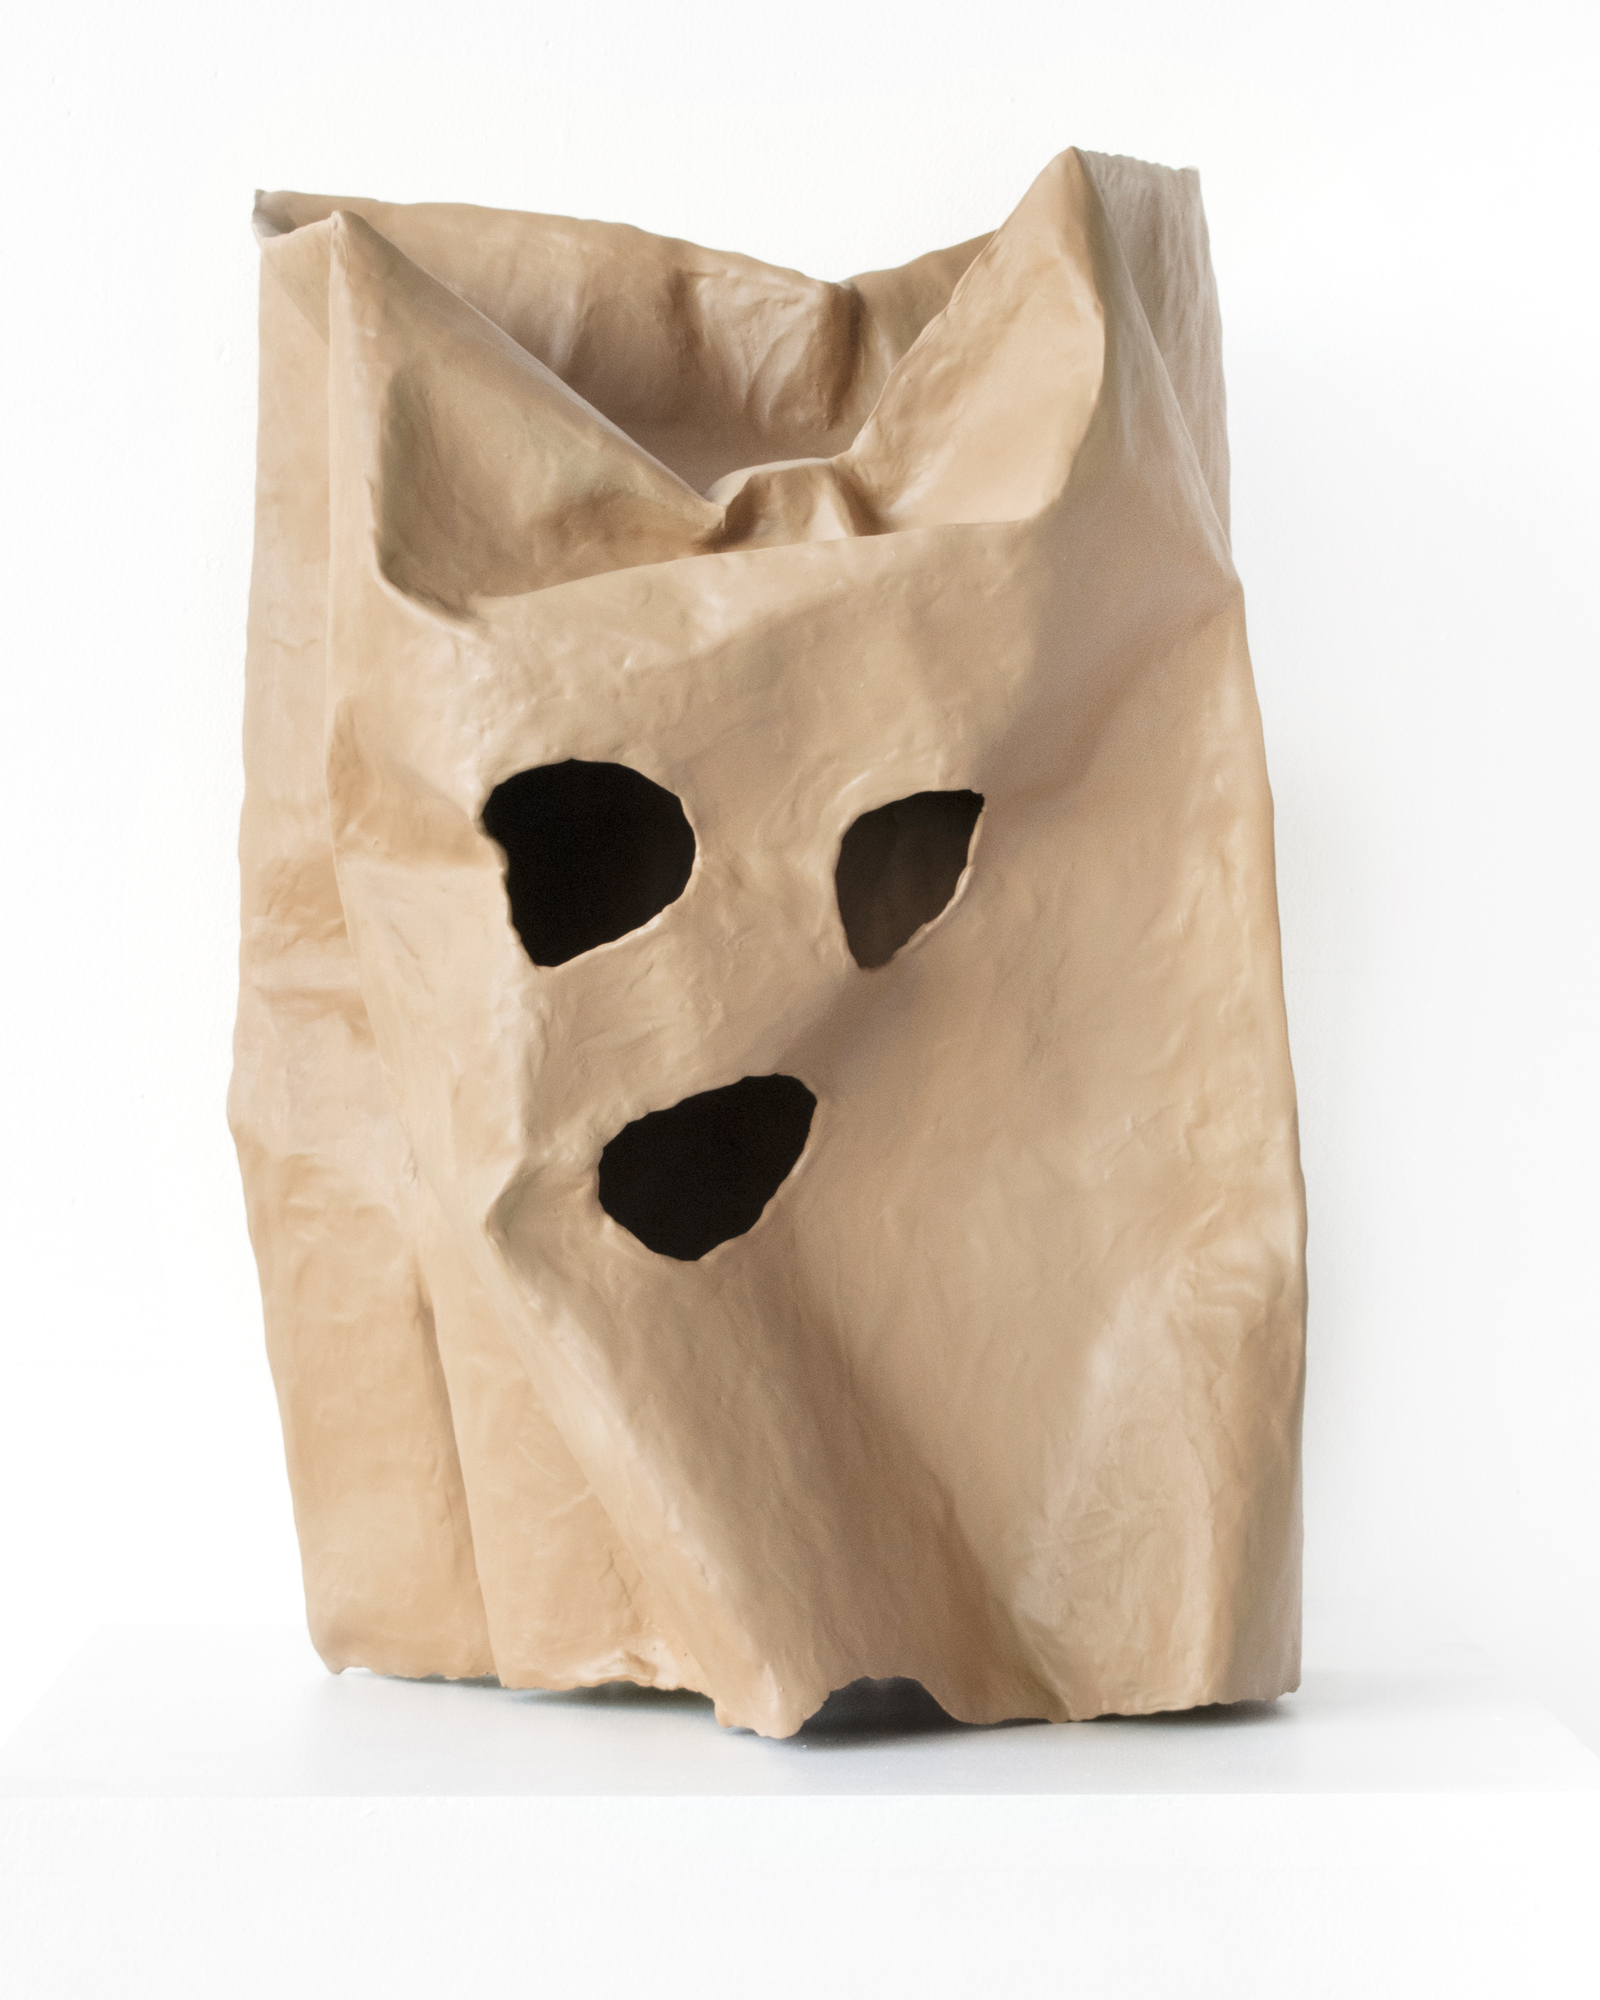 Take out factory Unfavorable Untitled (Bag Head 6) - Nick Fusaro